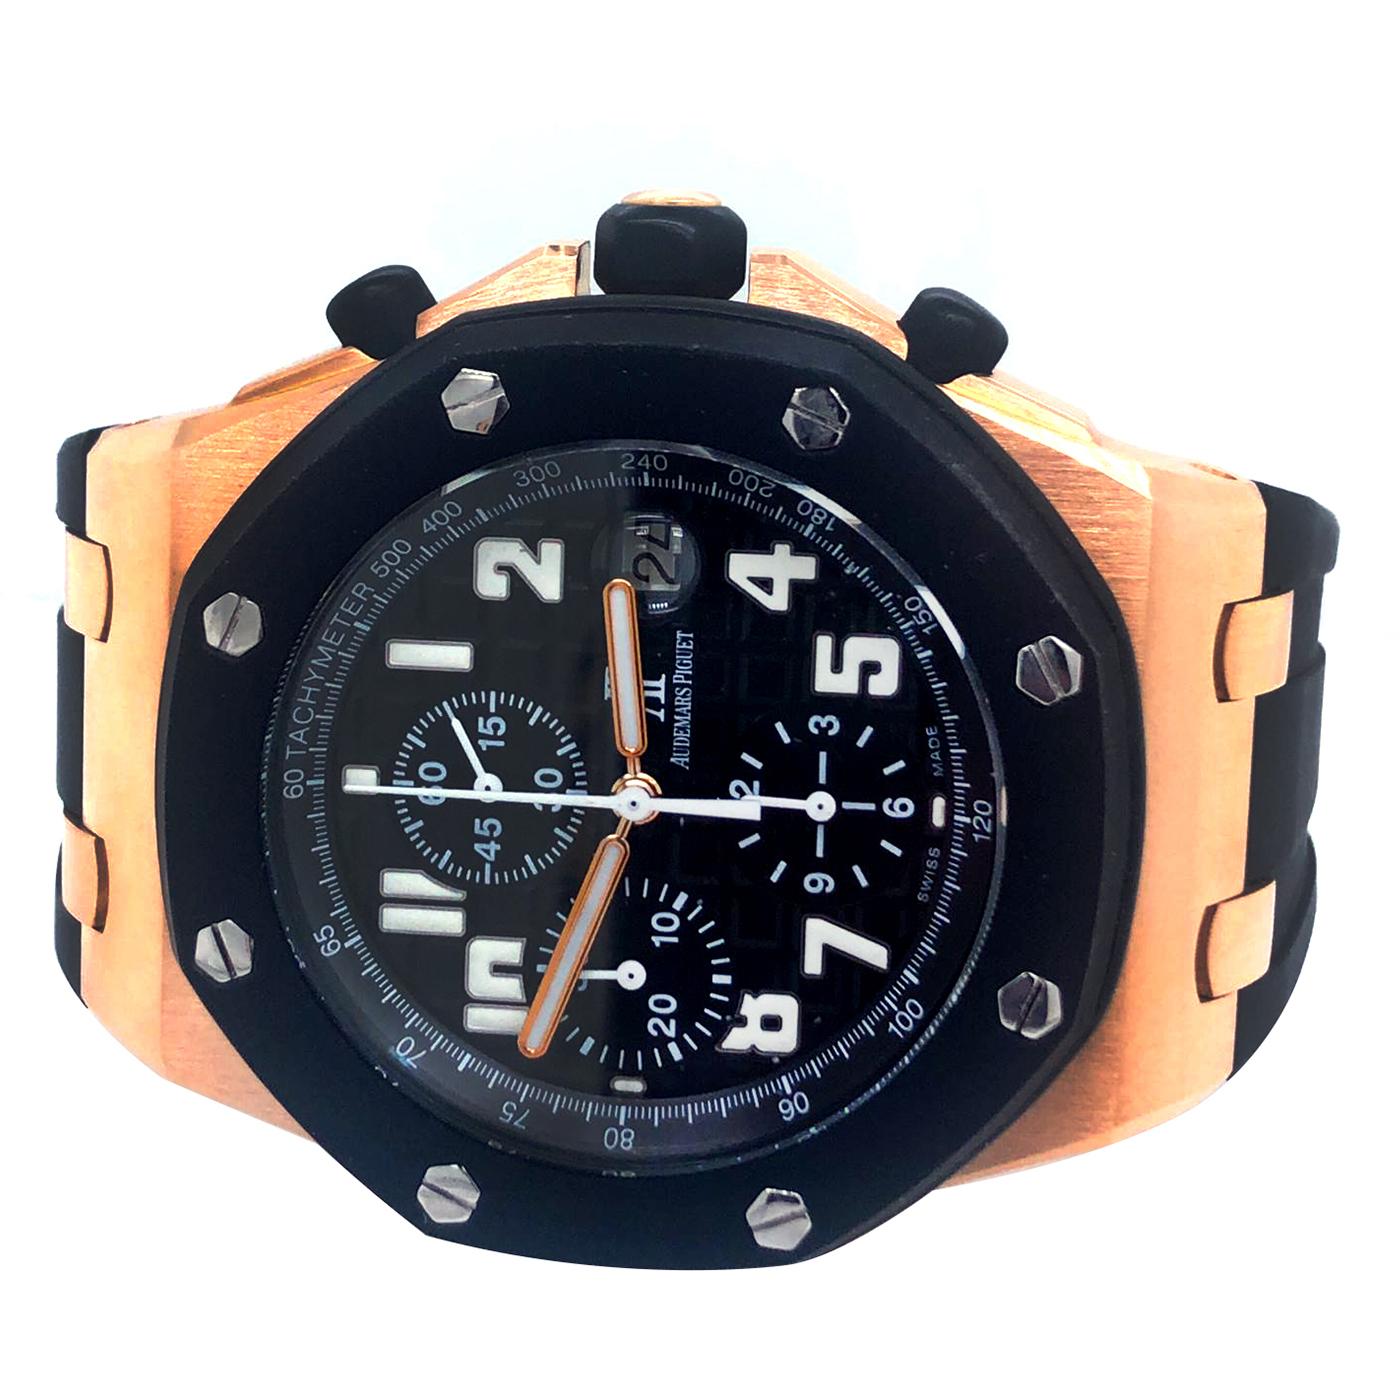 Royal Oak Offshore RubberClad In Good Condition. Comes With Audemars Piguet Box. The Brains Behind This Beauty Is The Audemars Piguet Caliber 2326/2840 Self-Winding Chronograph Movement With An Approximate Power Reserve Of 40 Hours When Fully Wound.